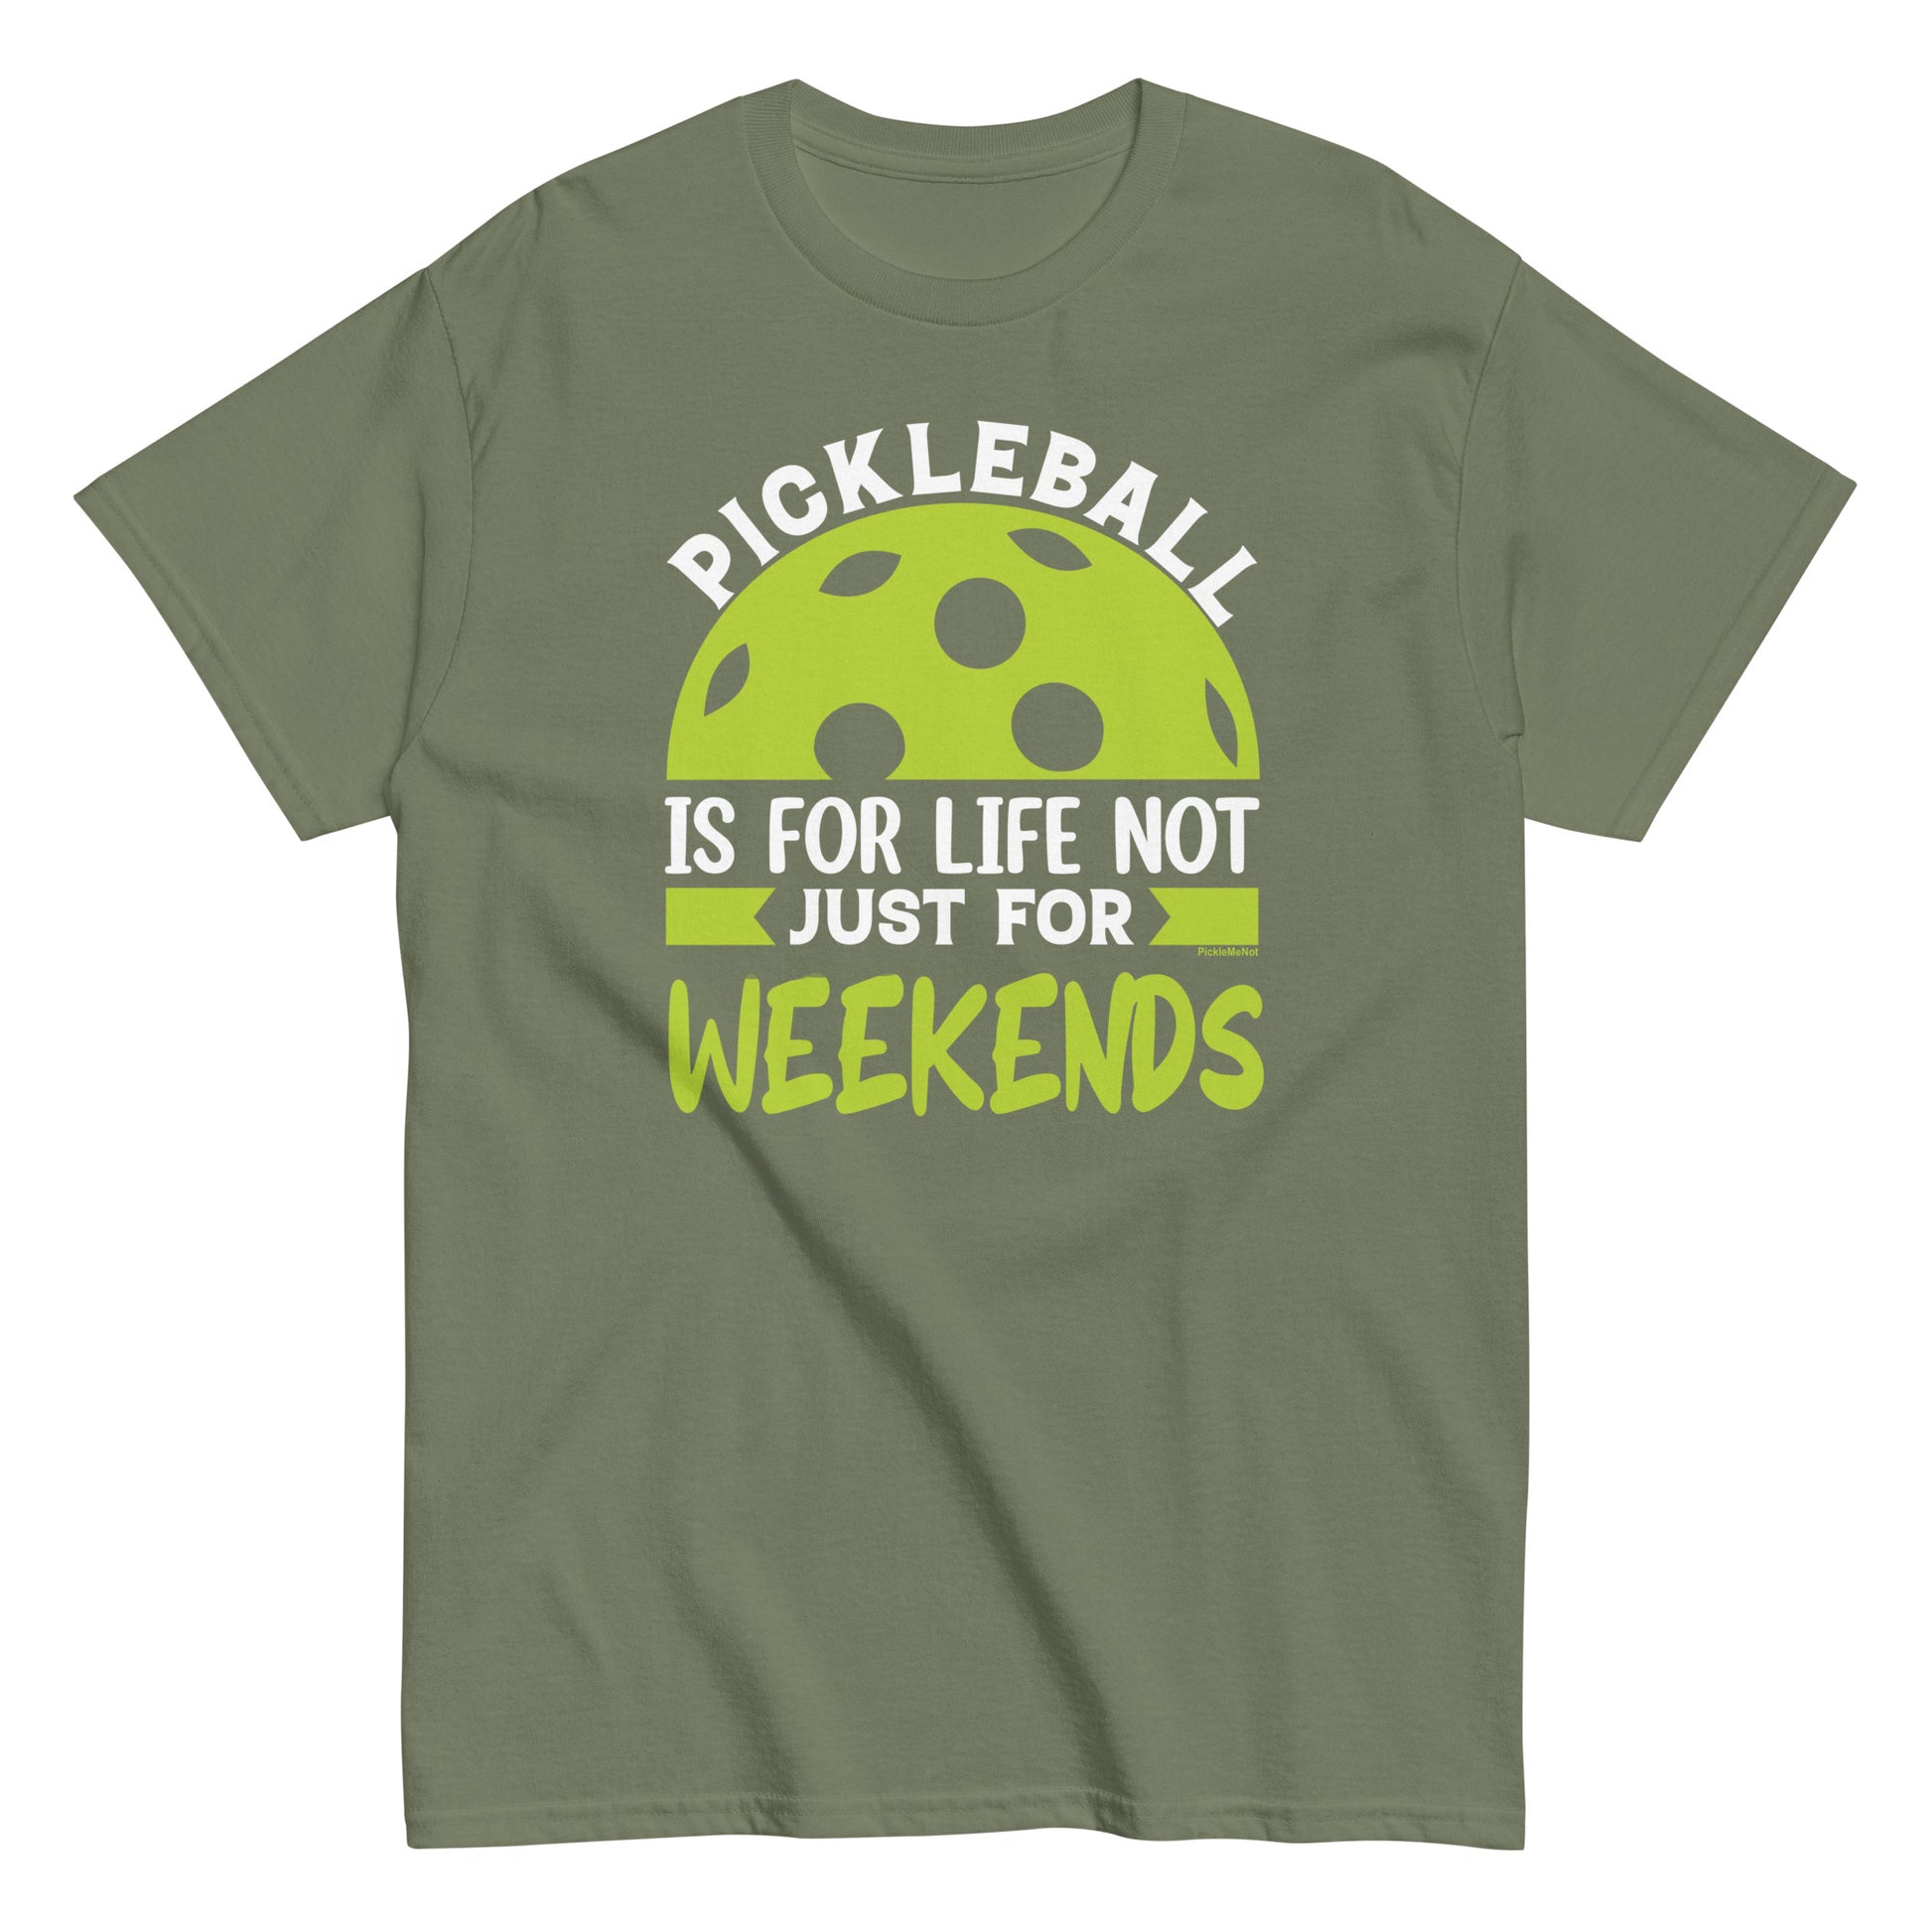 Fun Distressed Pickleball, "Pickleball Is For Life, Not Just The Weekend" Men's Classic  military Green ee